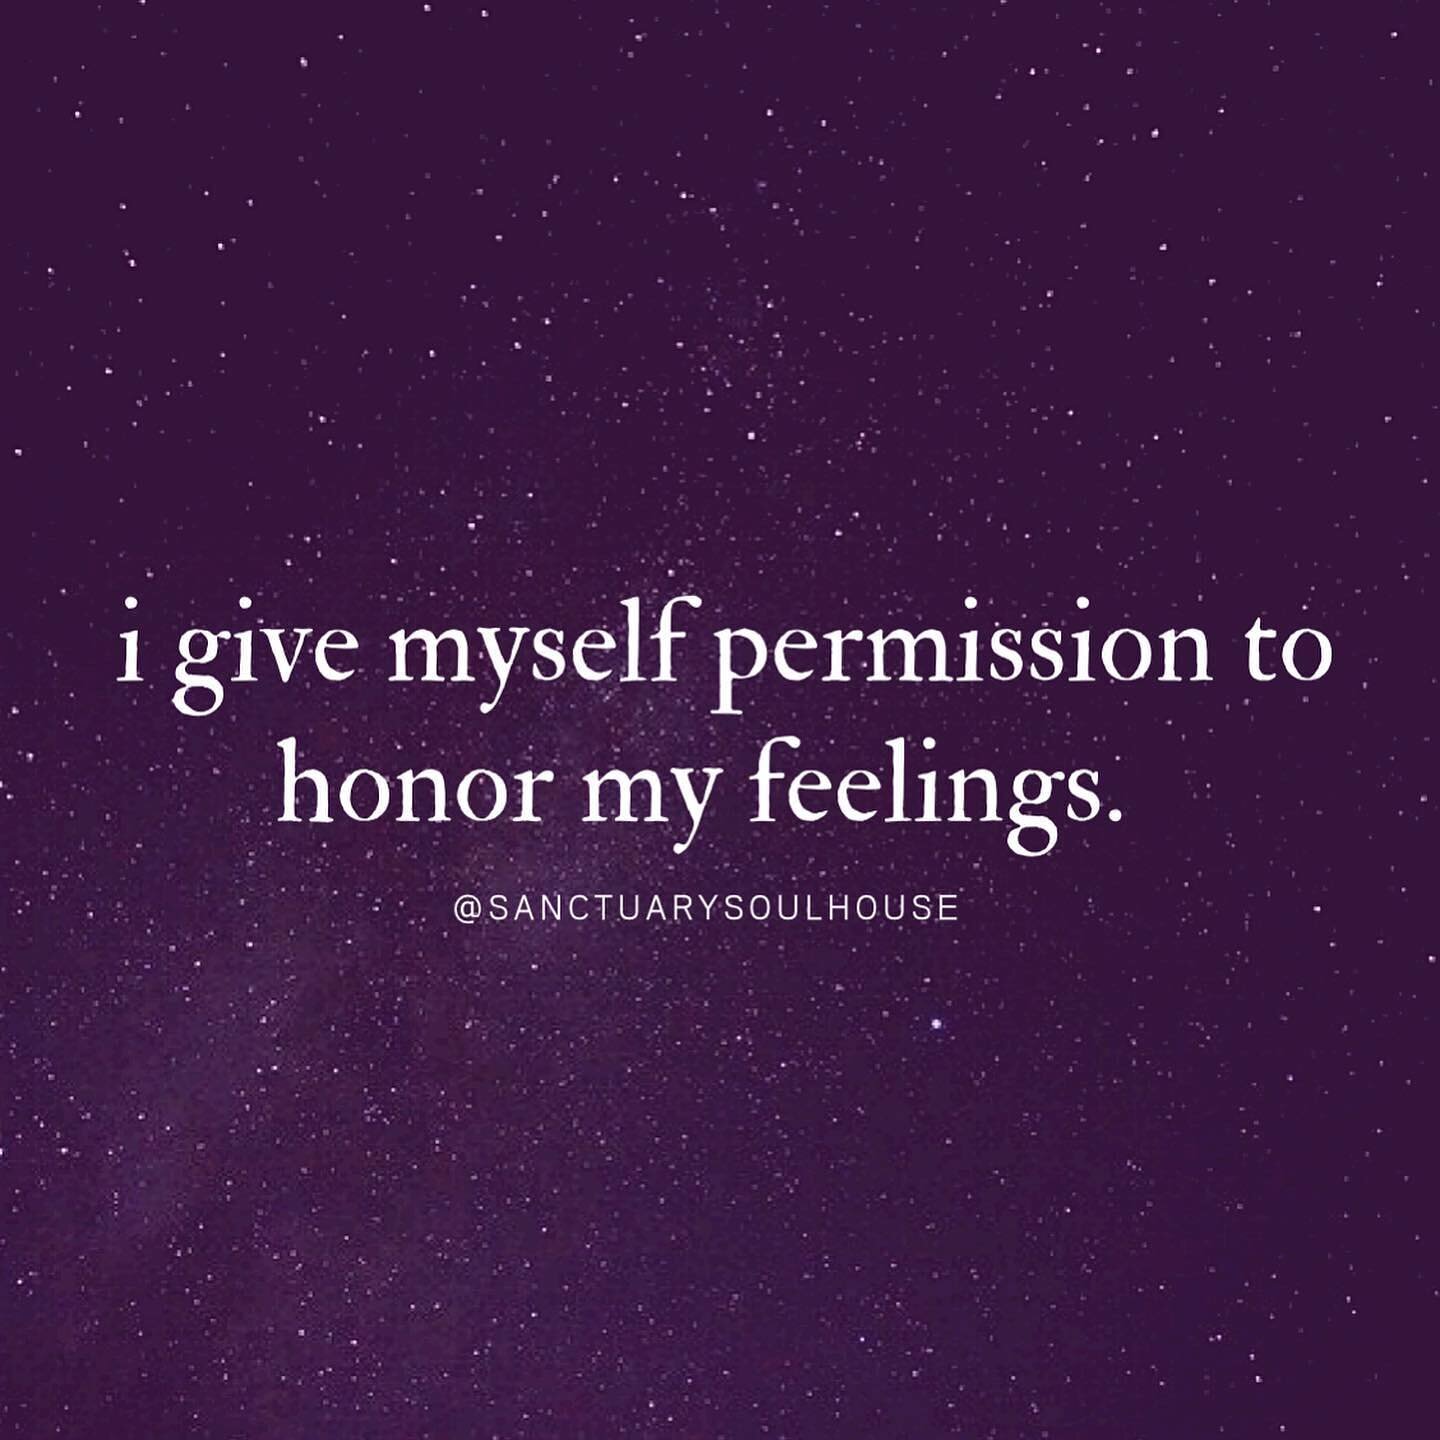 ✫ gentle reminder that permission to live your life is yours to take! what do you feel you need to give yourself permission for today? drop it in the comments! 

#selfcare #selfhealers #selfcaresunday #permission #prioritizeyourself